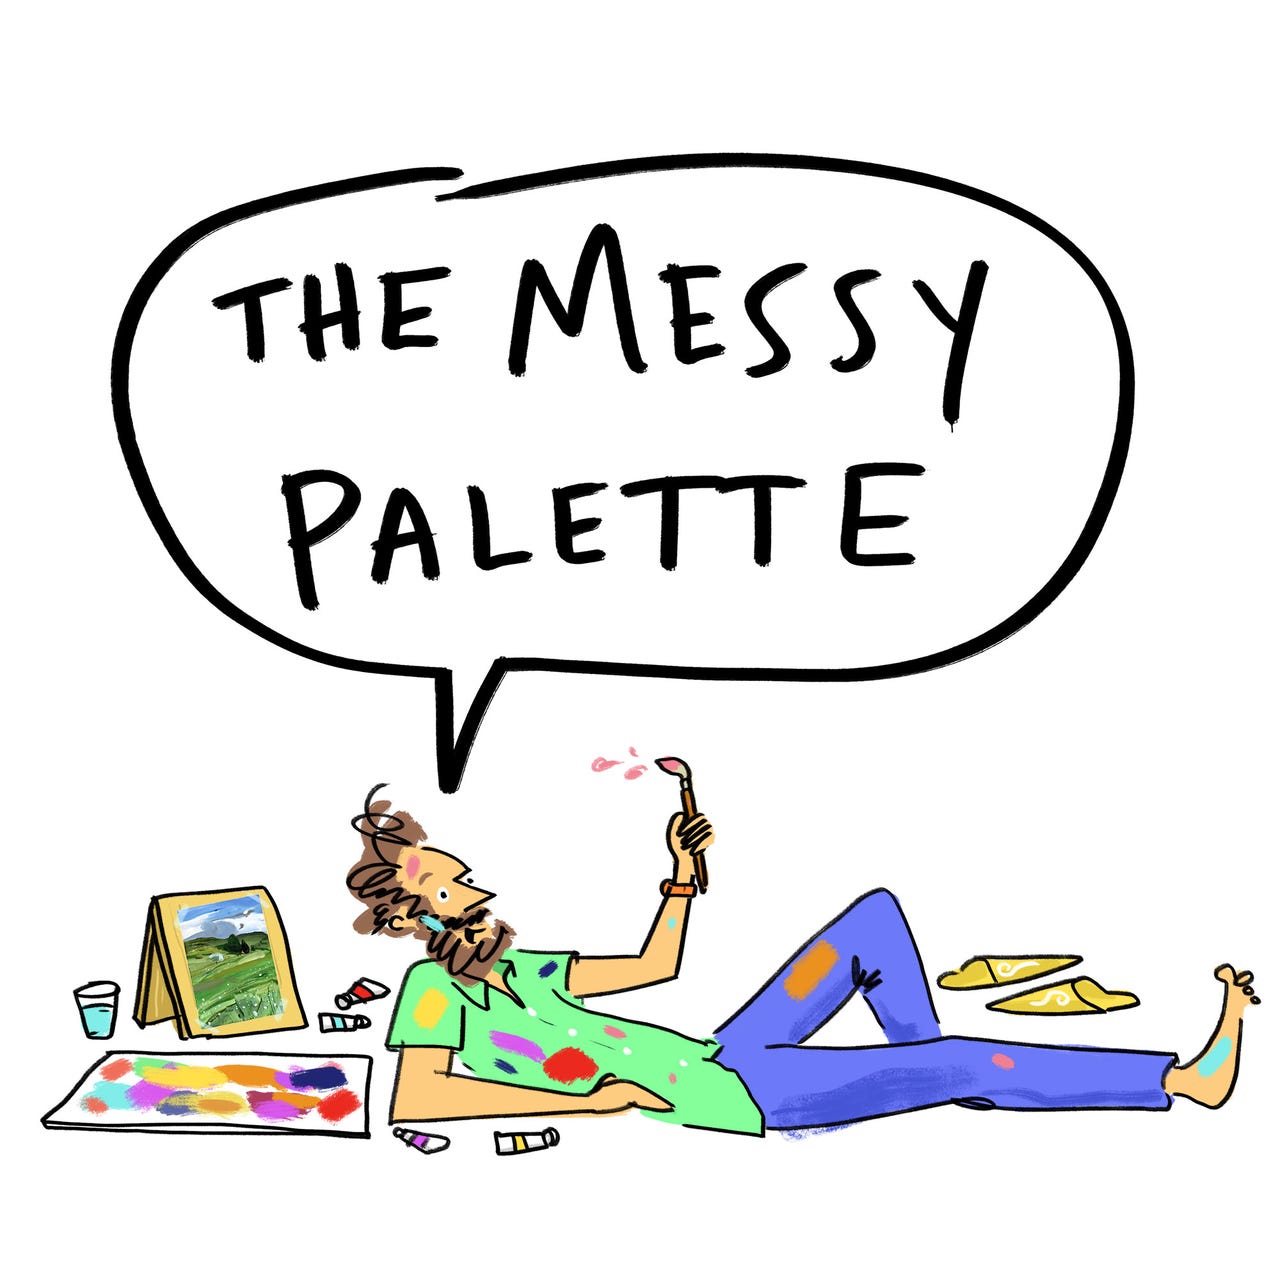 The Messy Palette